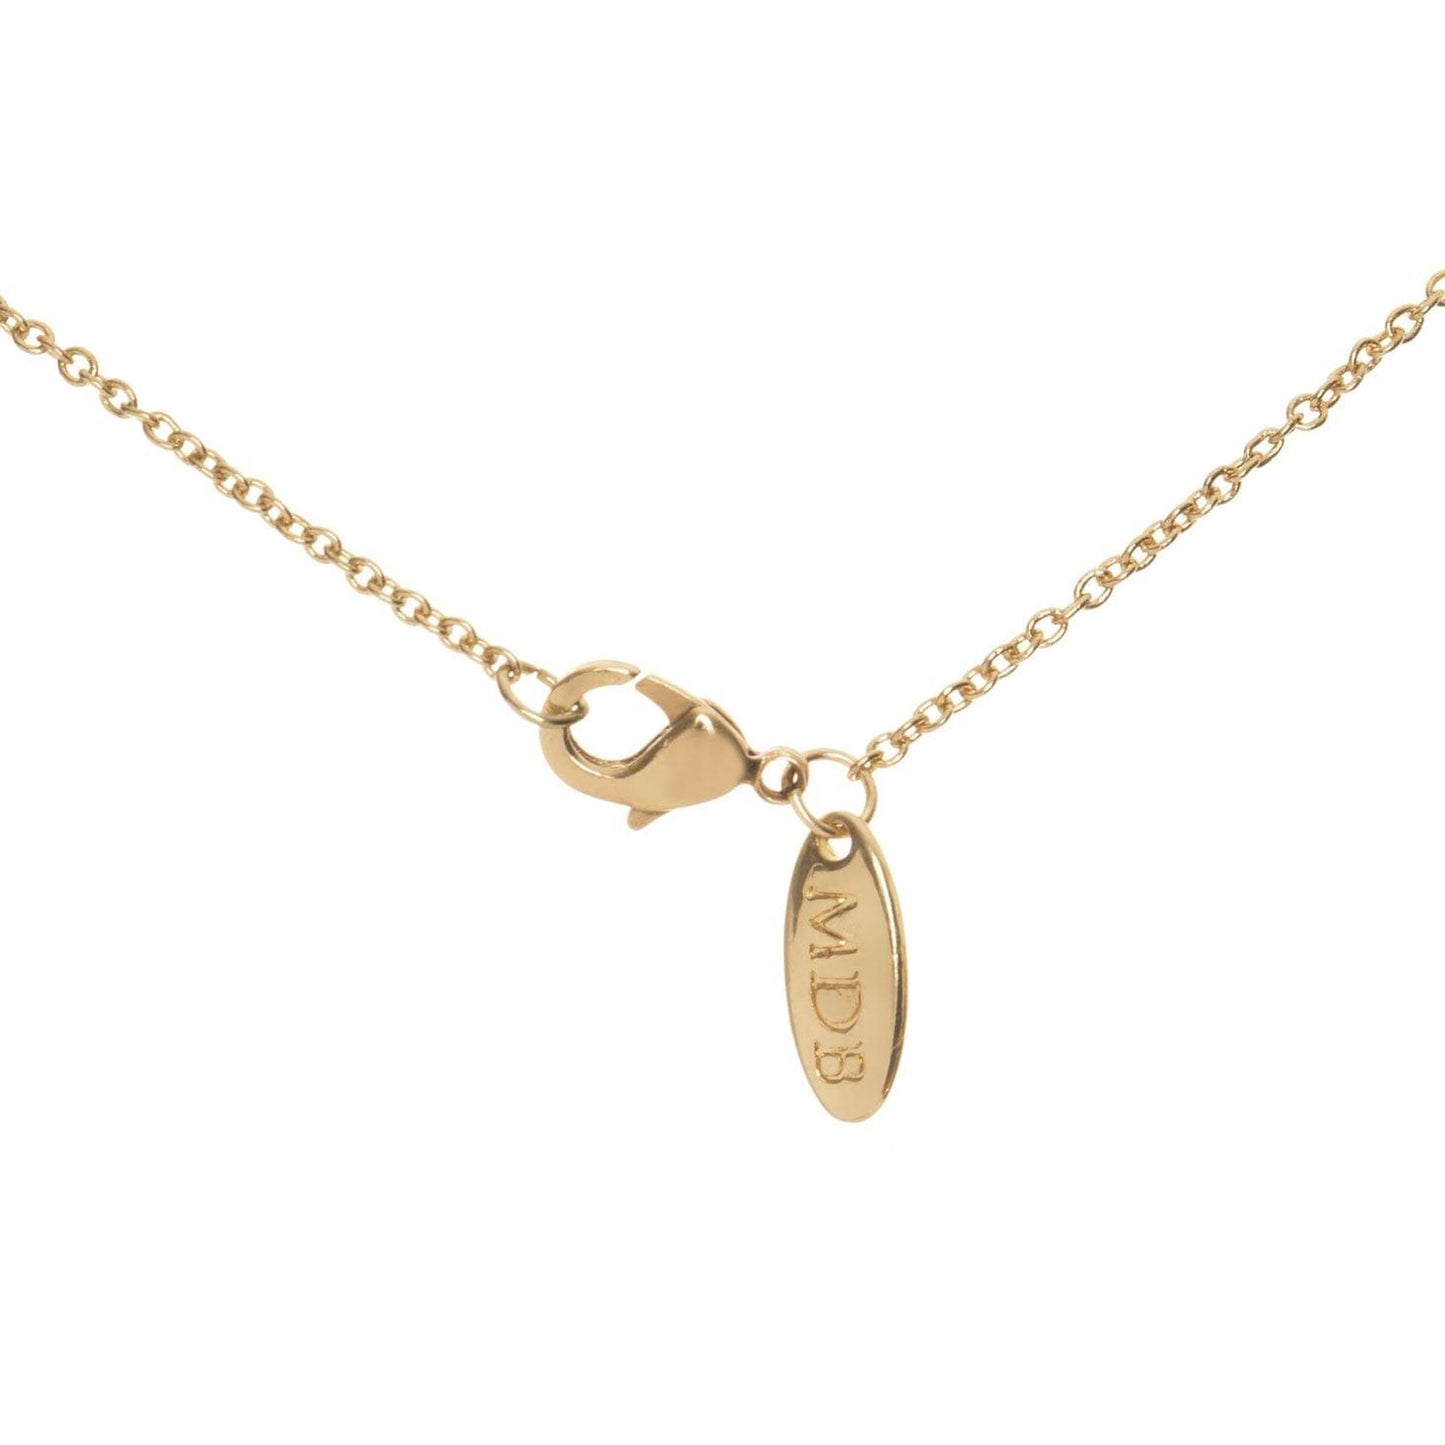 Lumiela Personalized Nameplate Grace Necklace in Gold Tone